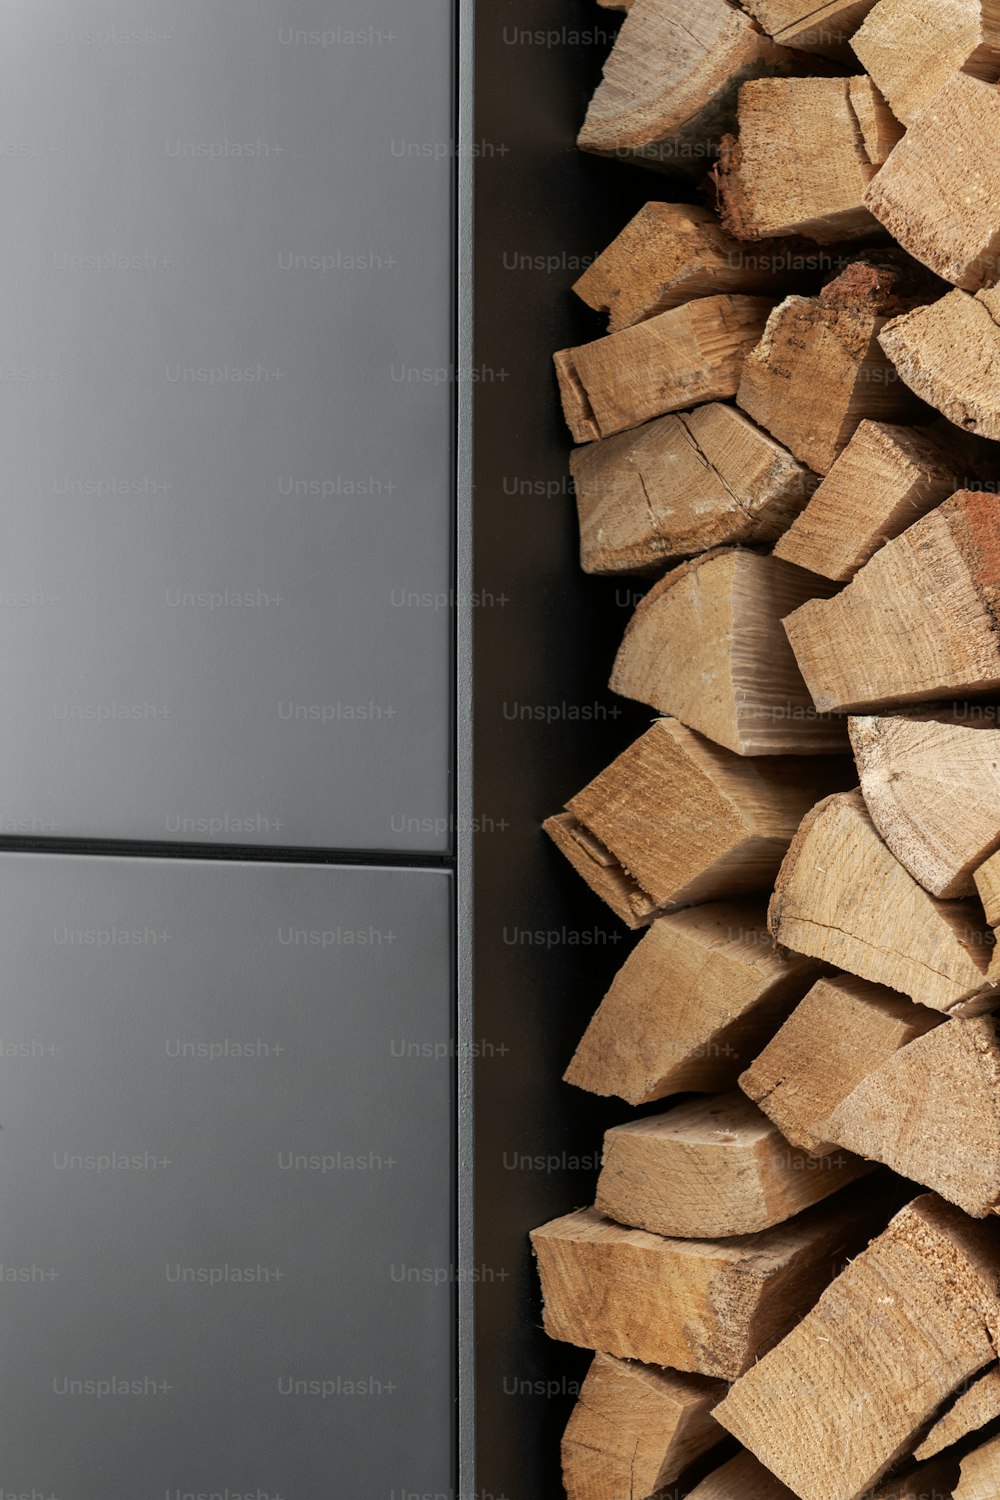 a stack of wood sitting next to a refrigerator